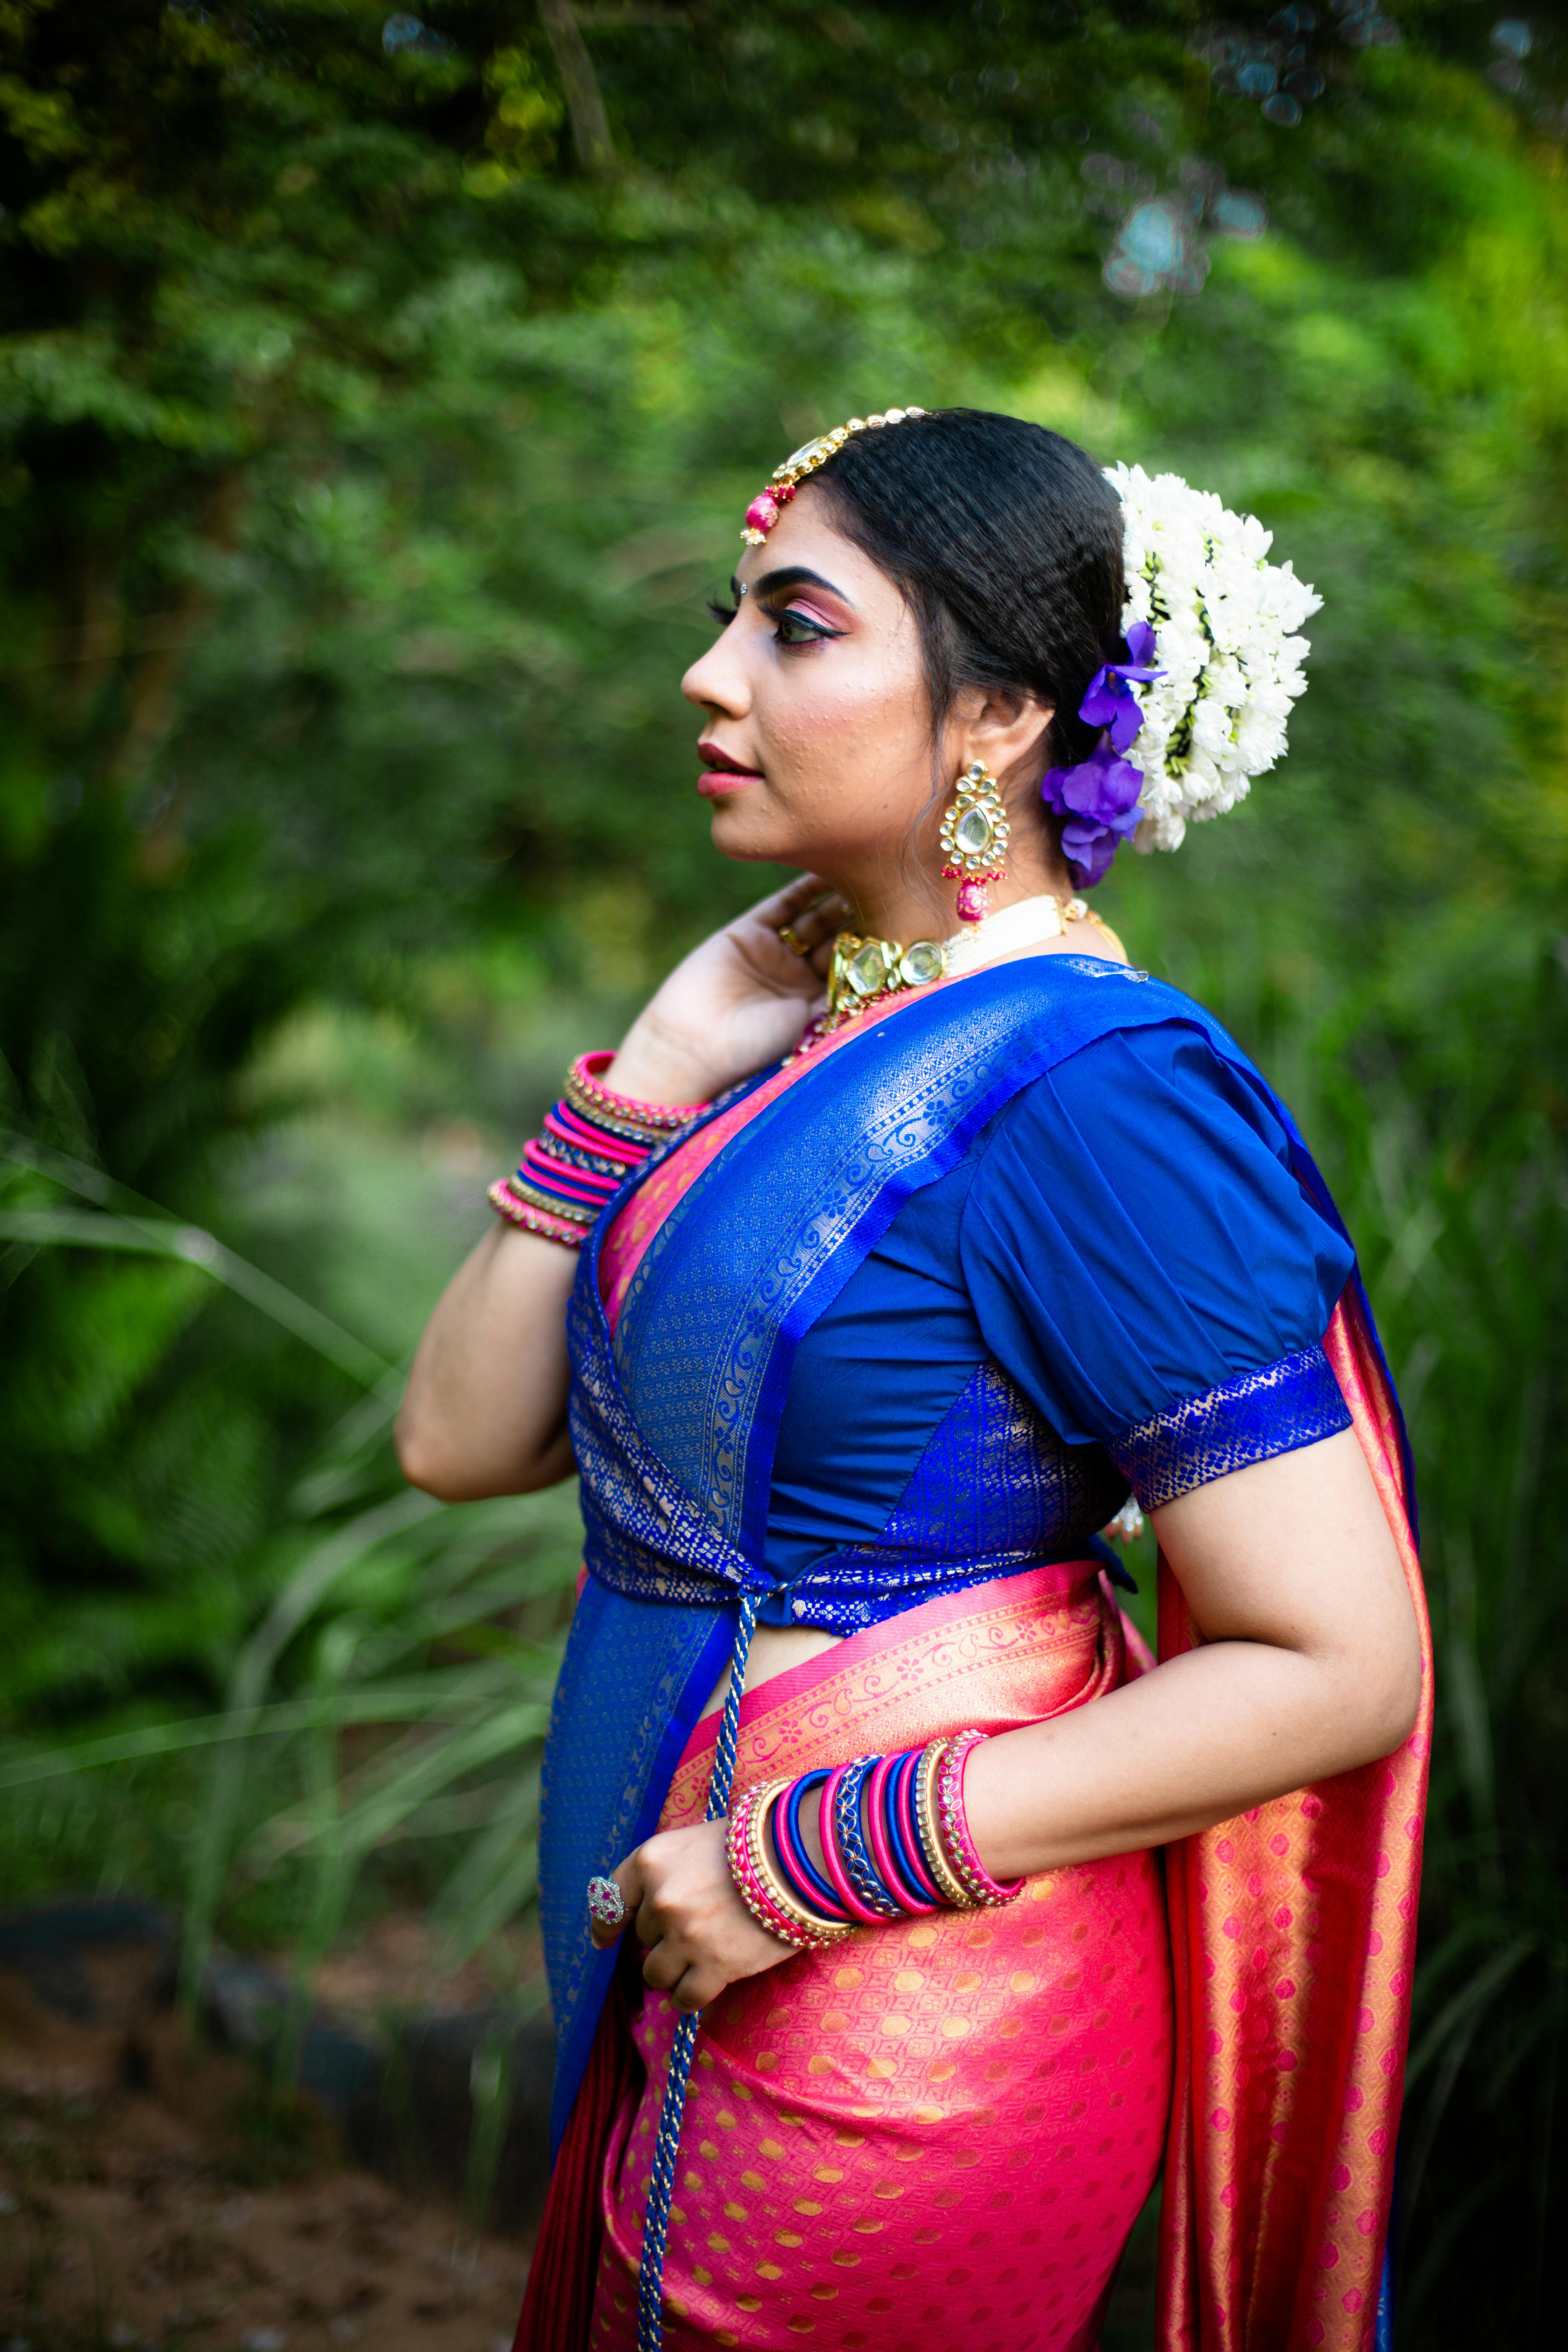 A Woman Posing in a Saree · Free Stock Photo